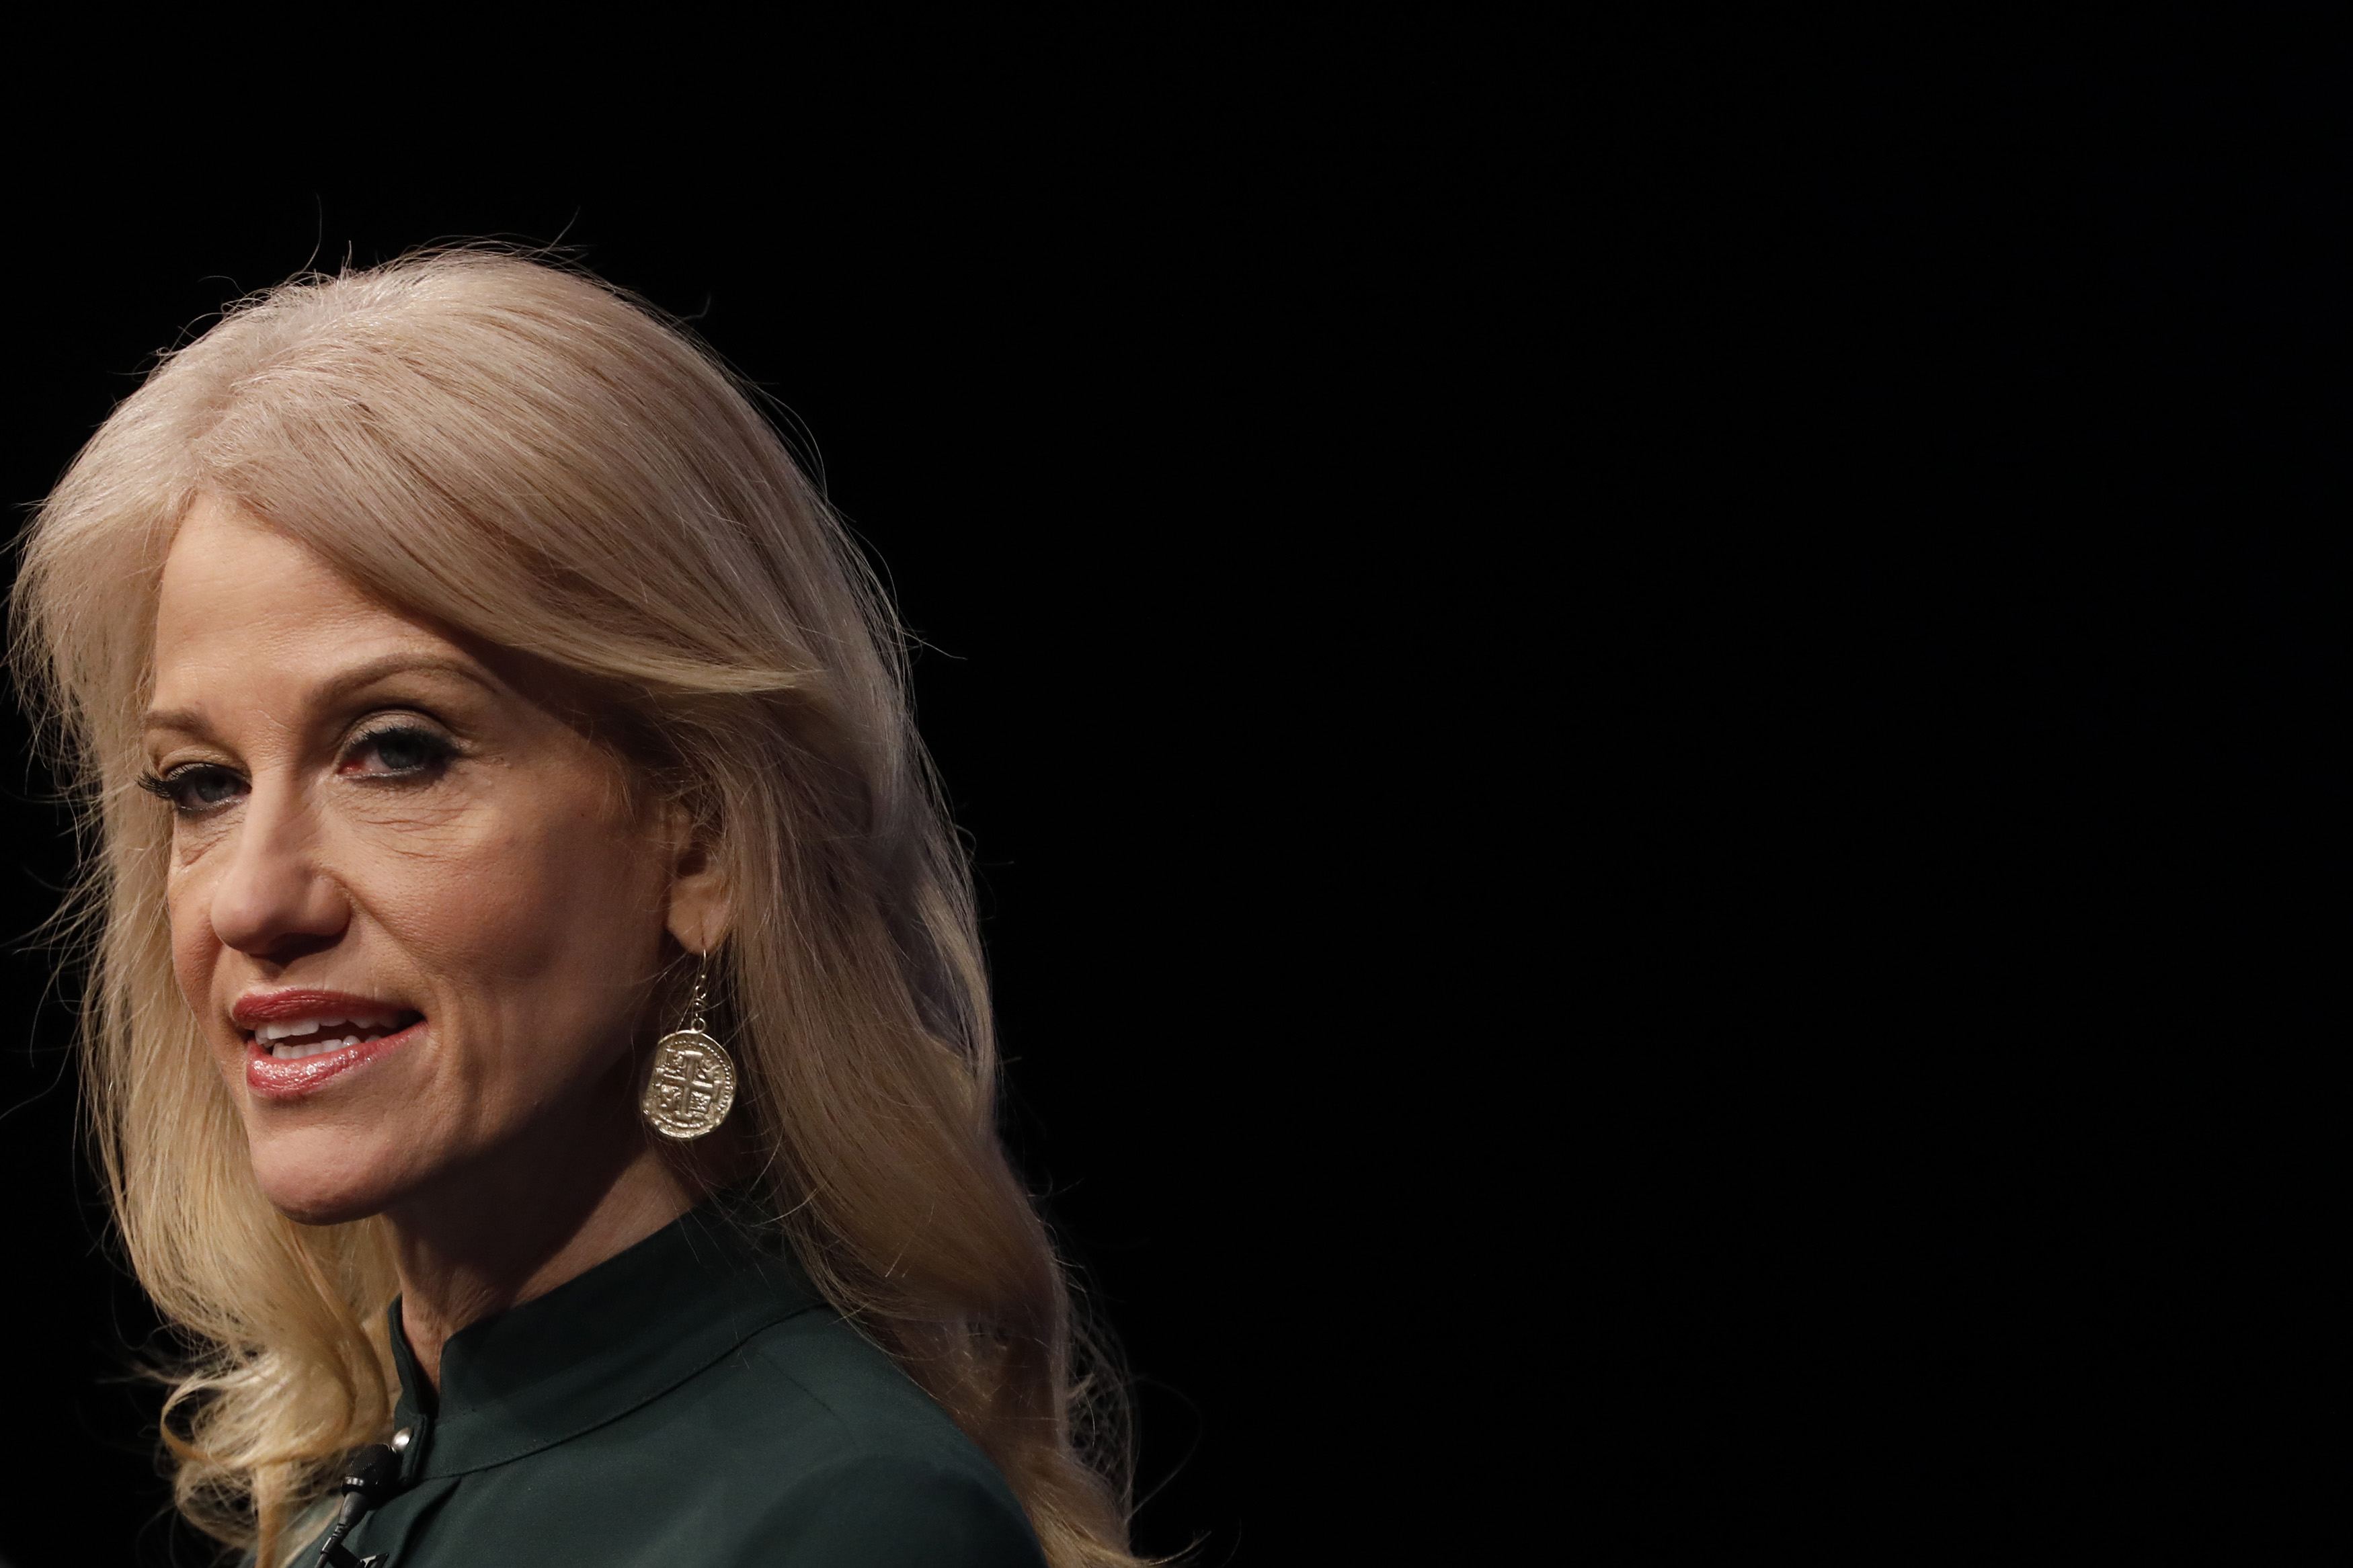 On the day of the 2017 sale of Kellyanne Conway’s polling business to the firm Creative Response Concepts Inc., a lawyer filed similar liens with Virginia regulators for both CRC and BH Fund, which financial experts say suggested the dark money group played a role in financing the transaction.